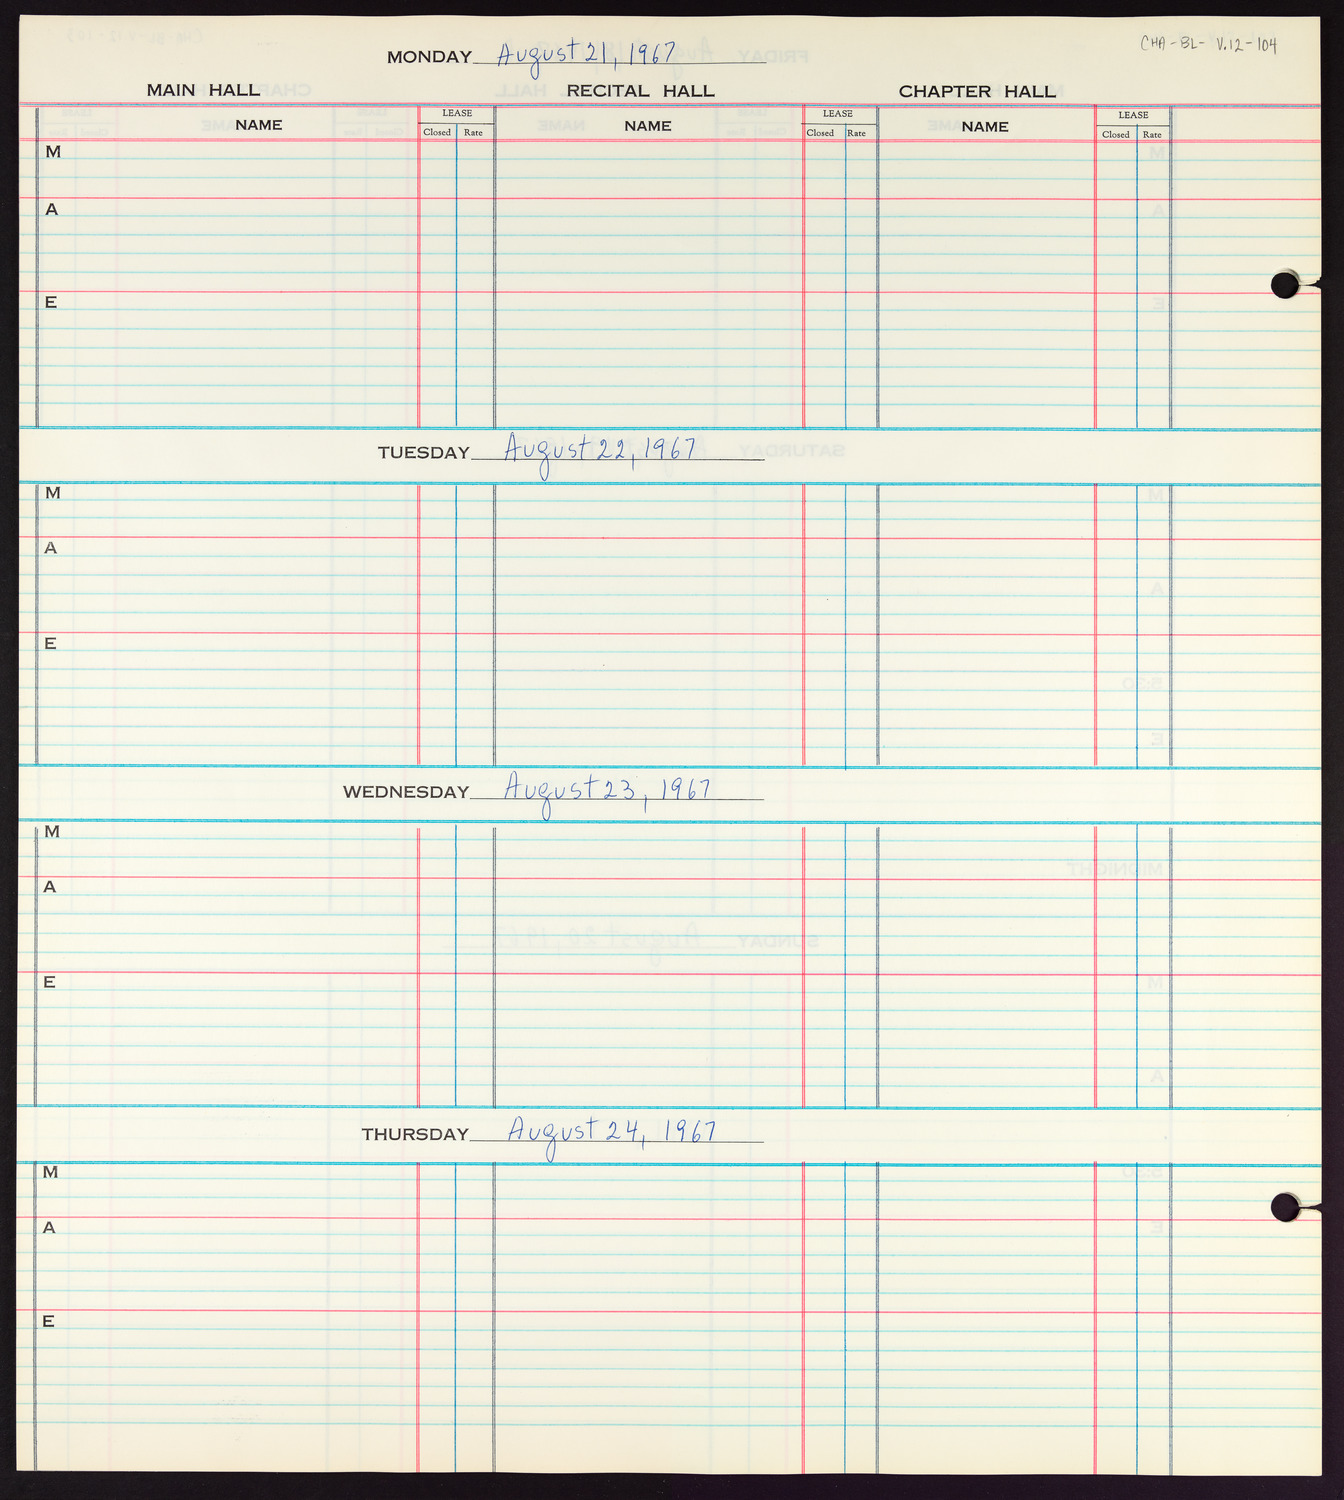 Carnegie Hall Booking Ledger, volume 12, page 104